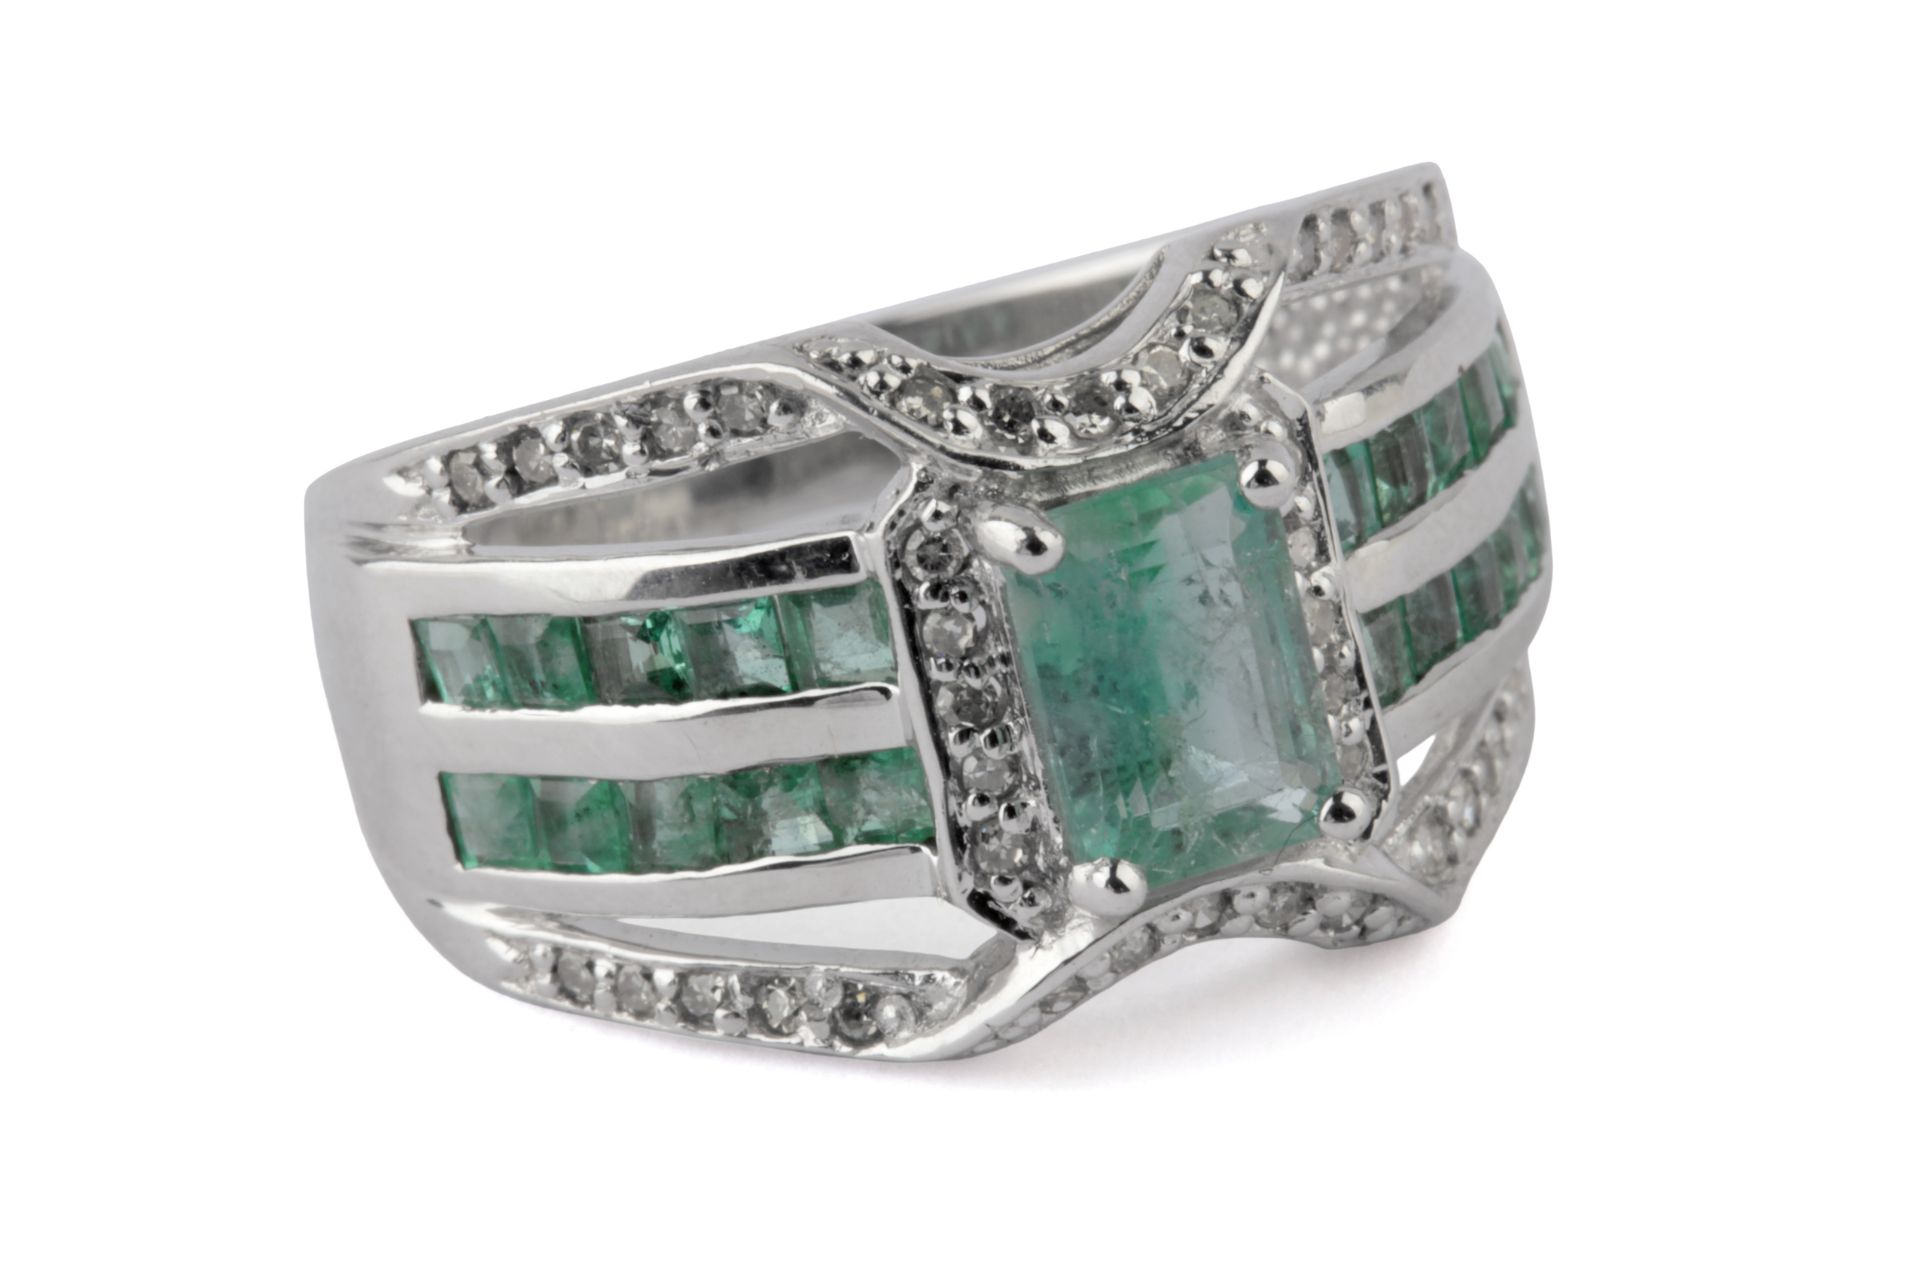 Emeralds and diamonds ring with an 18k white gold setting